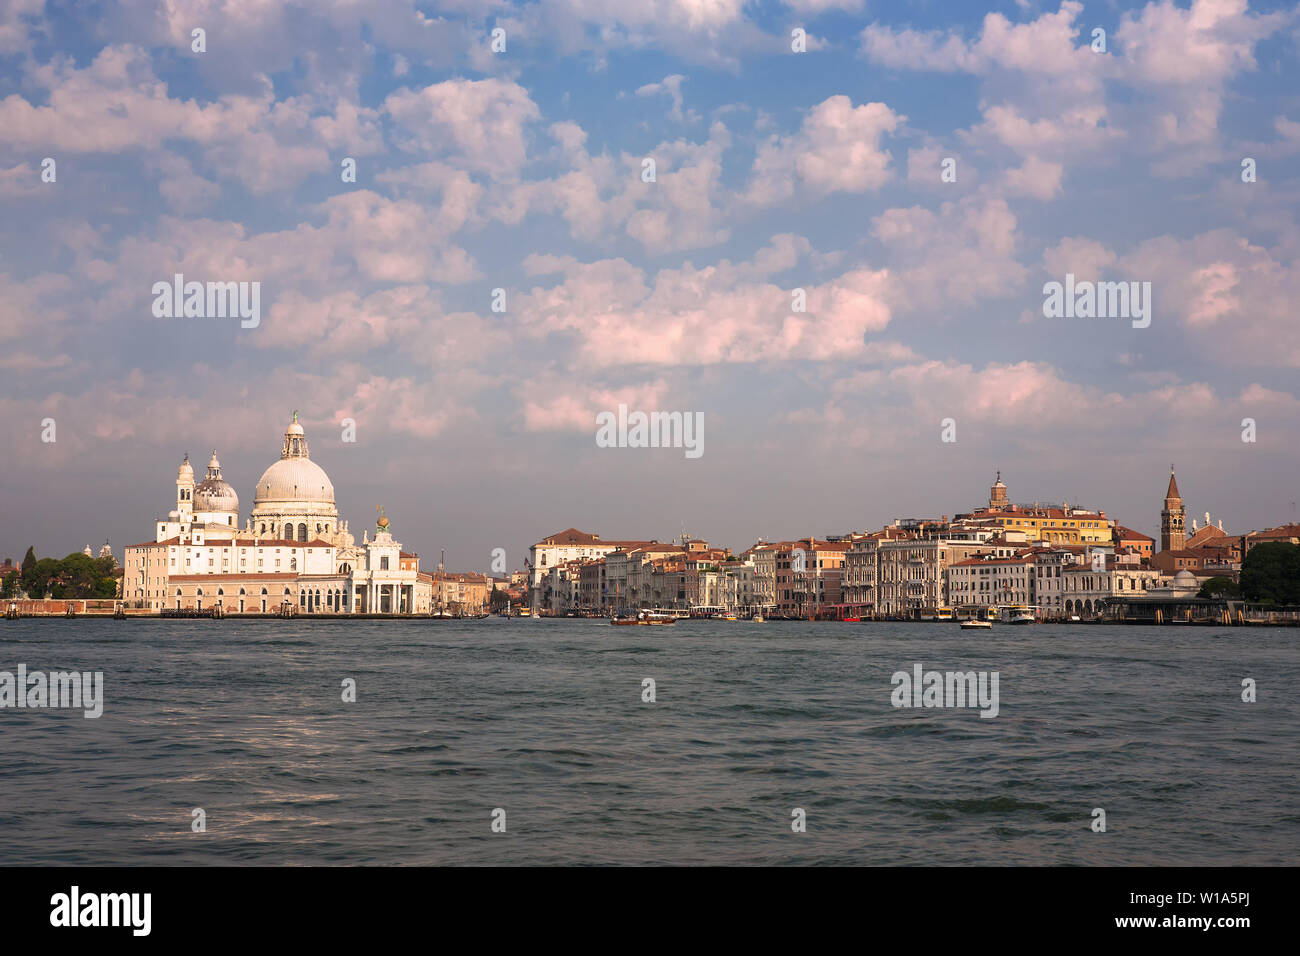 The entrance to the Canale Grande, the Punta della Dogana, and the Salute from the Bacino di San Marco, Venice, Italy Stock Photo